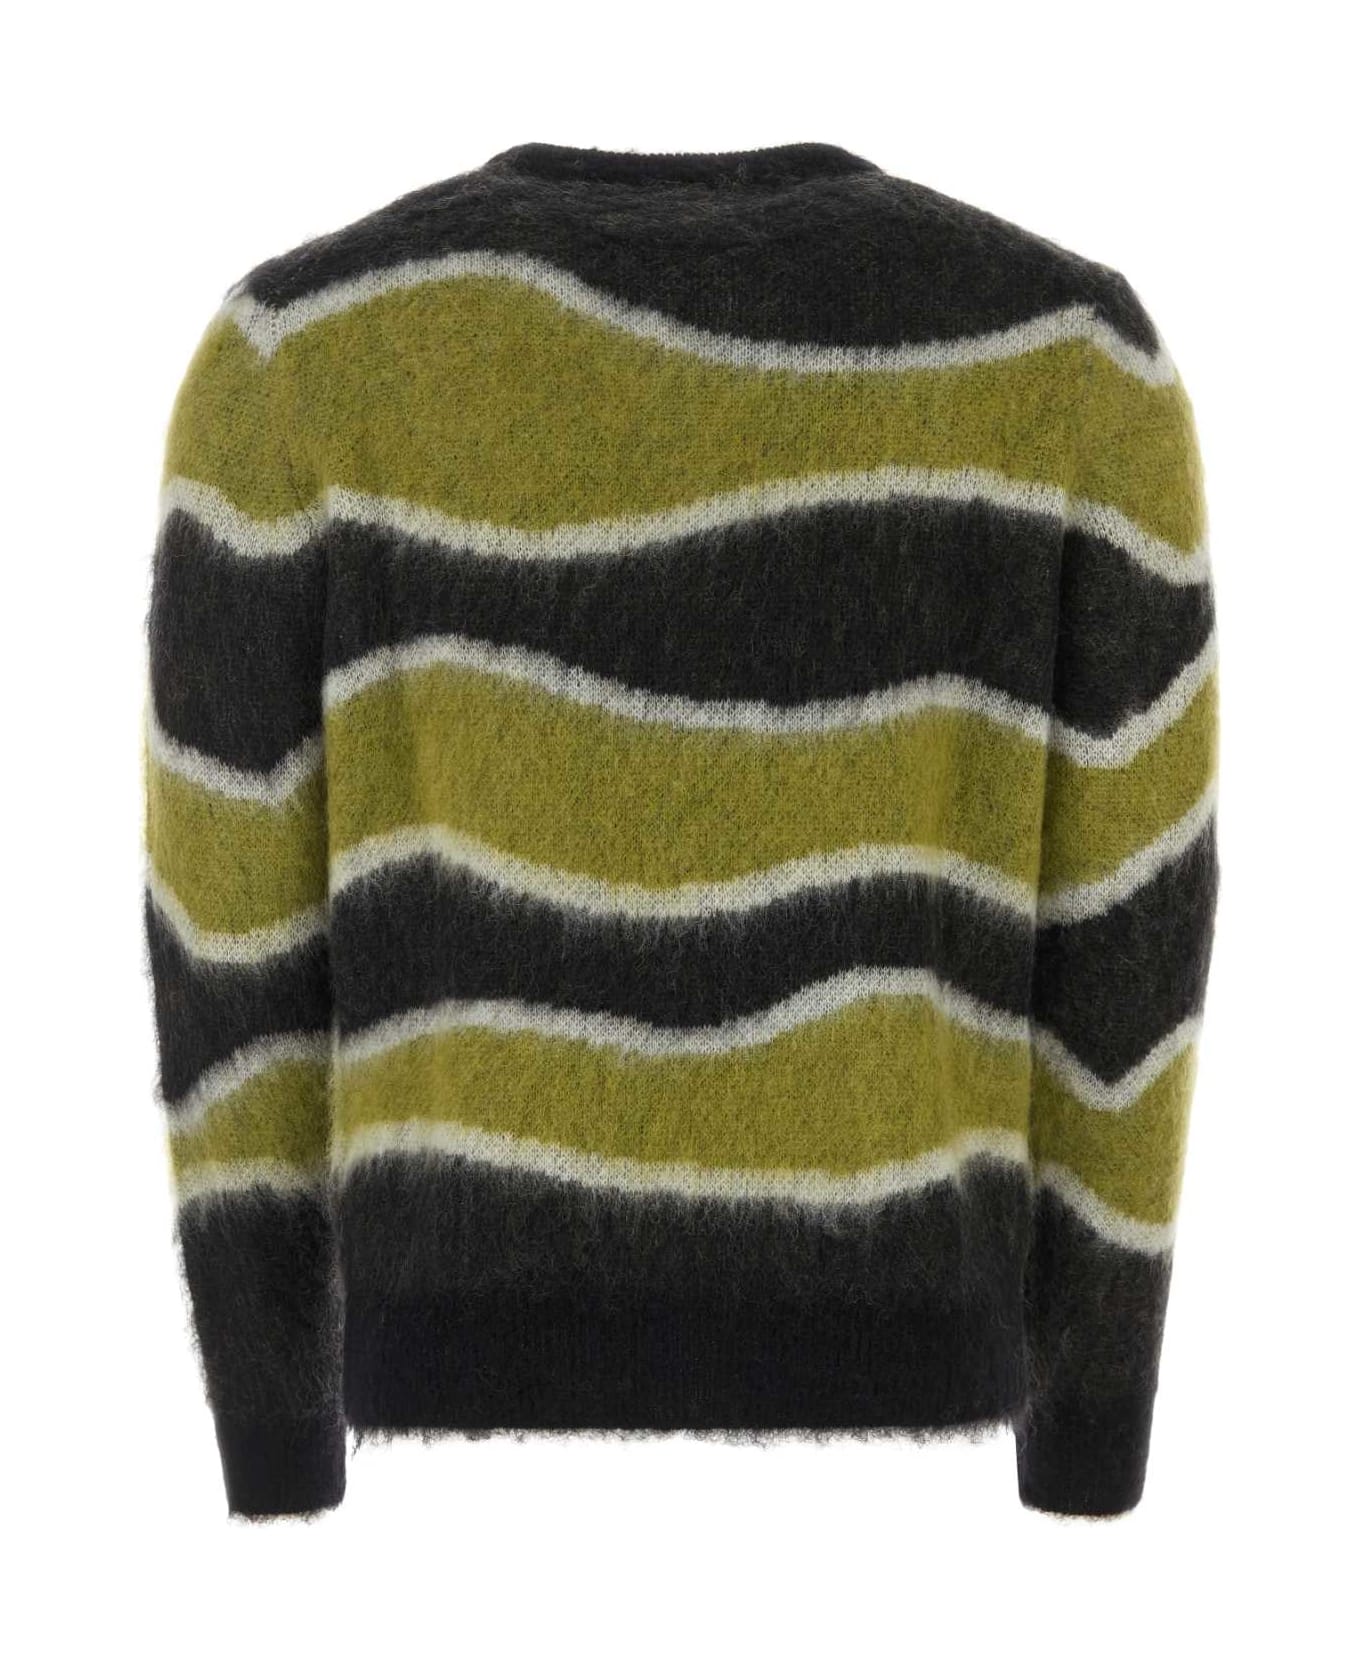 PT Torino Embroidered Mohair Blend Sweater - 0990